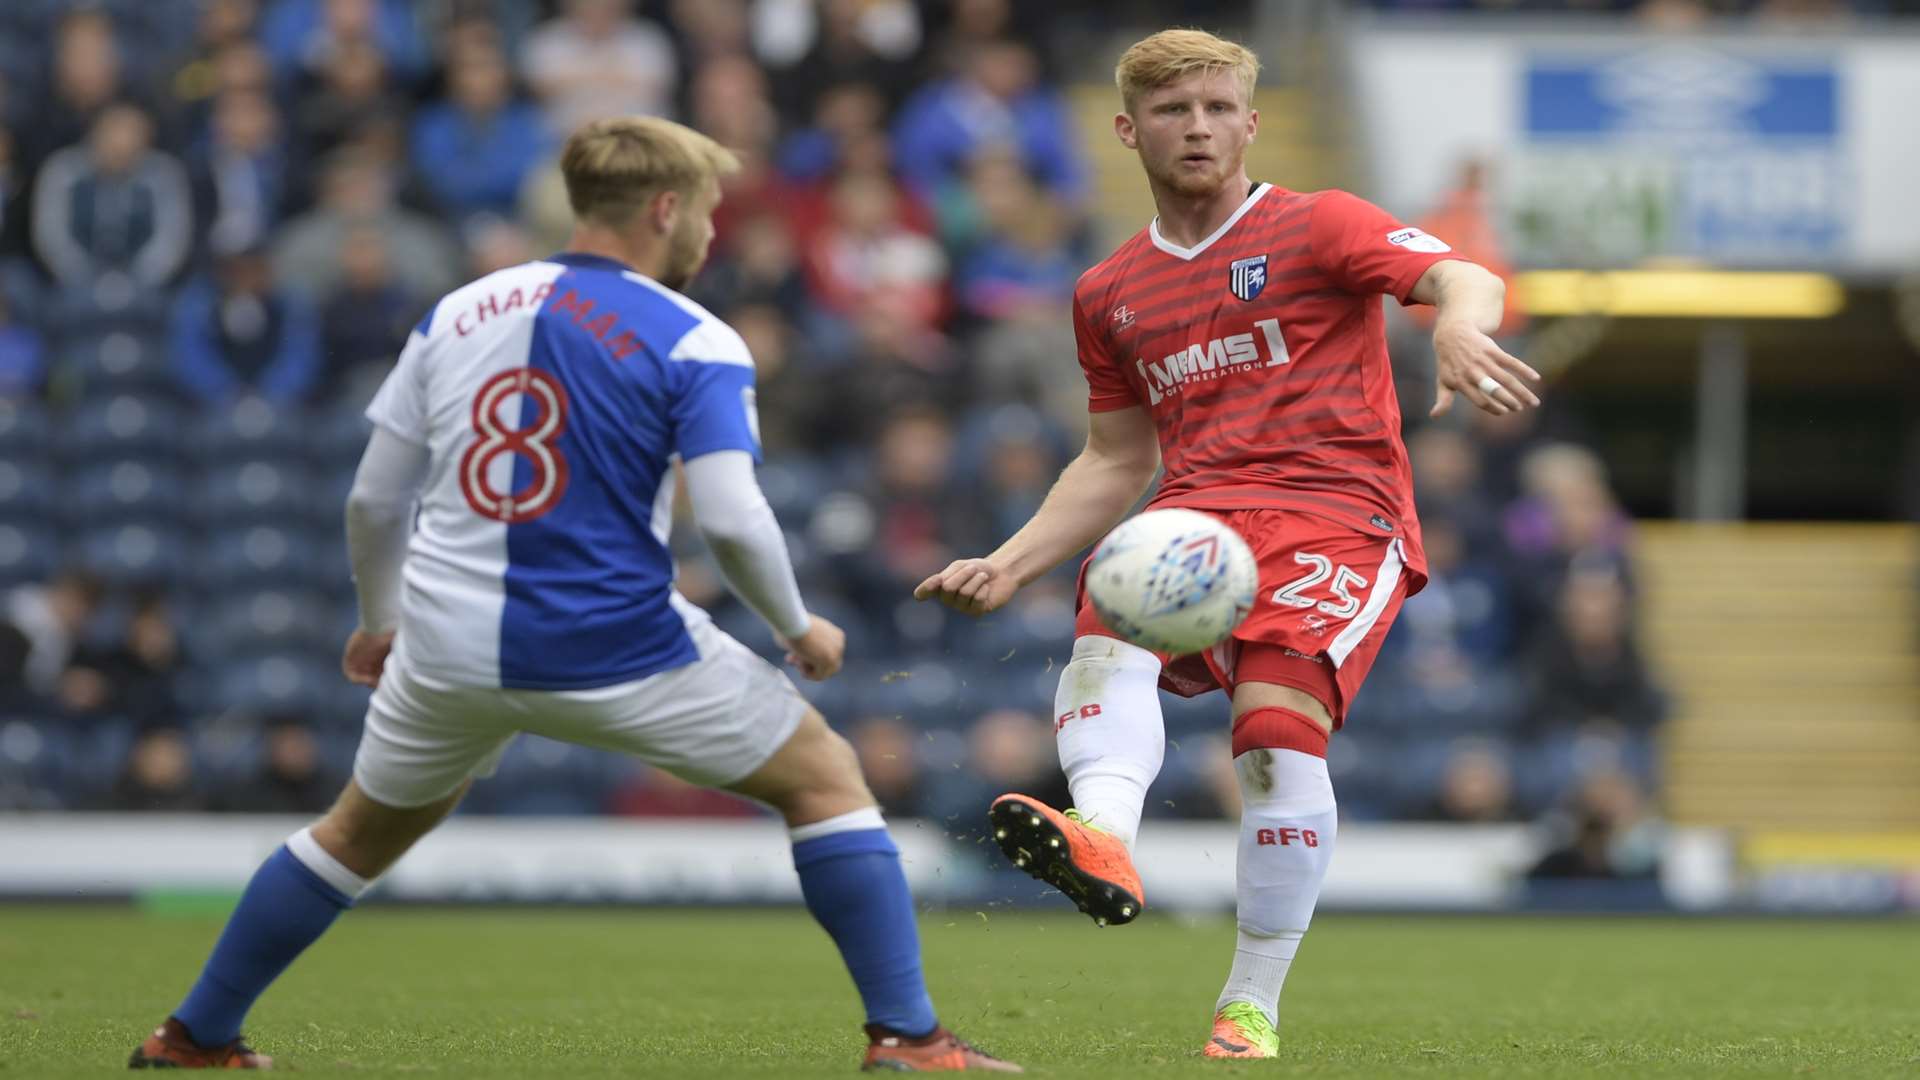 Finn O'Mara swapped Cheriton Road for Ewood Park on Saturday Picture: Barry Goodwin